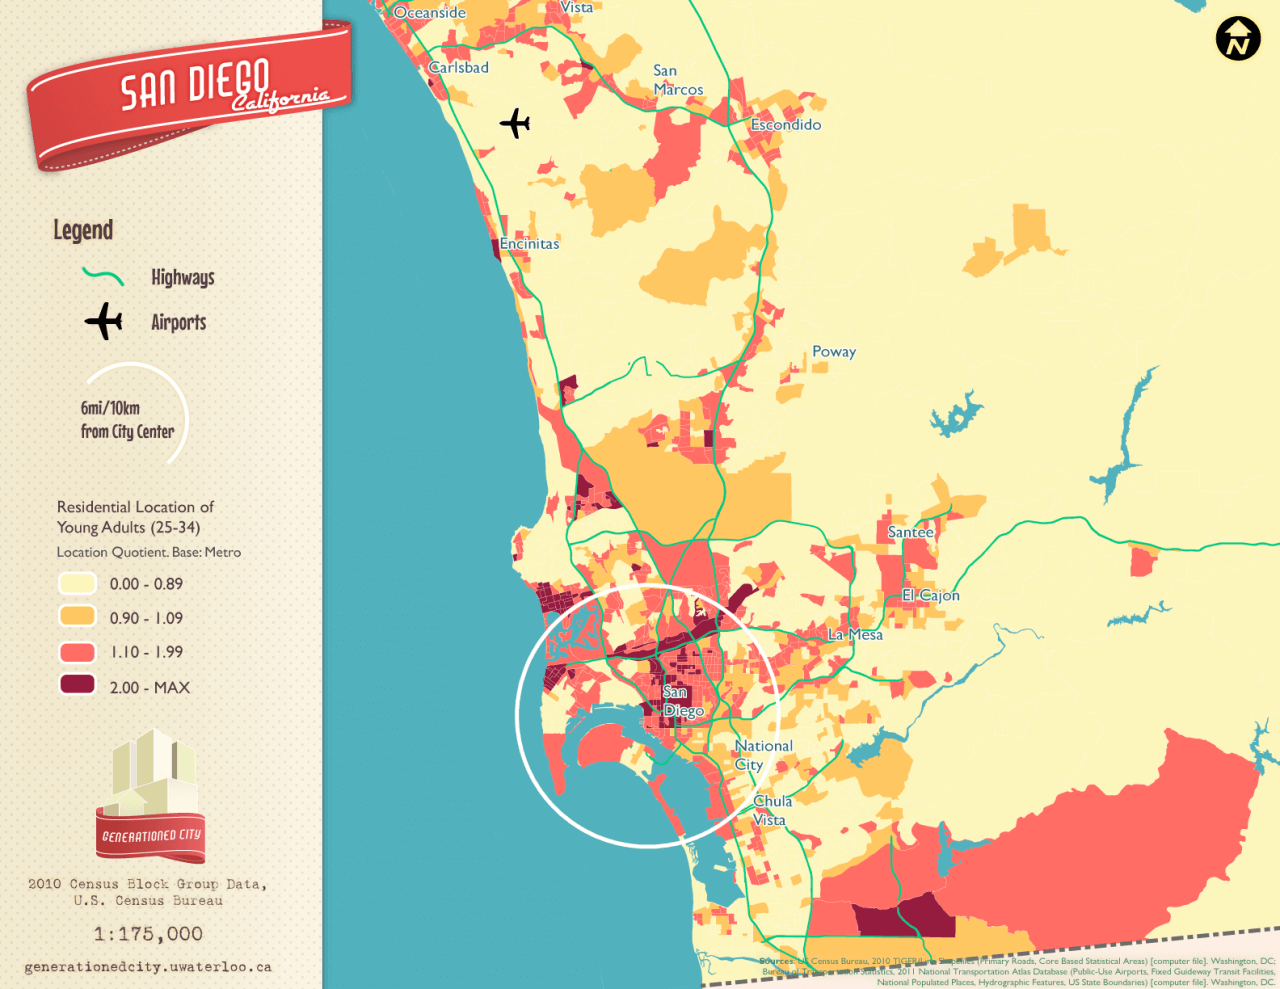 Residential location of young adults in San Diego.